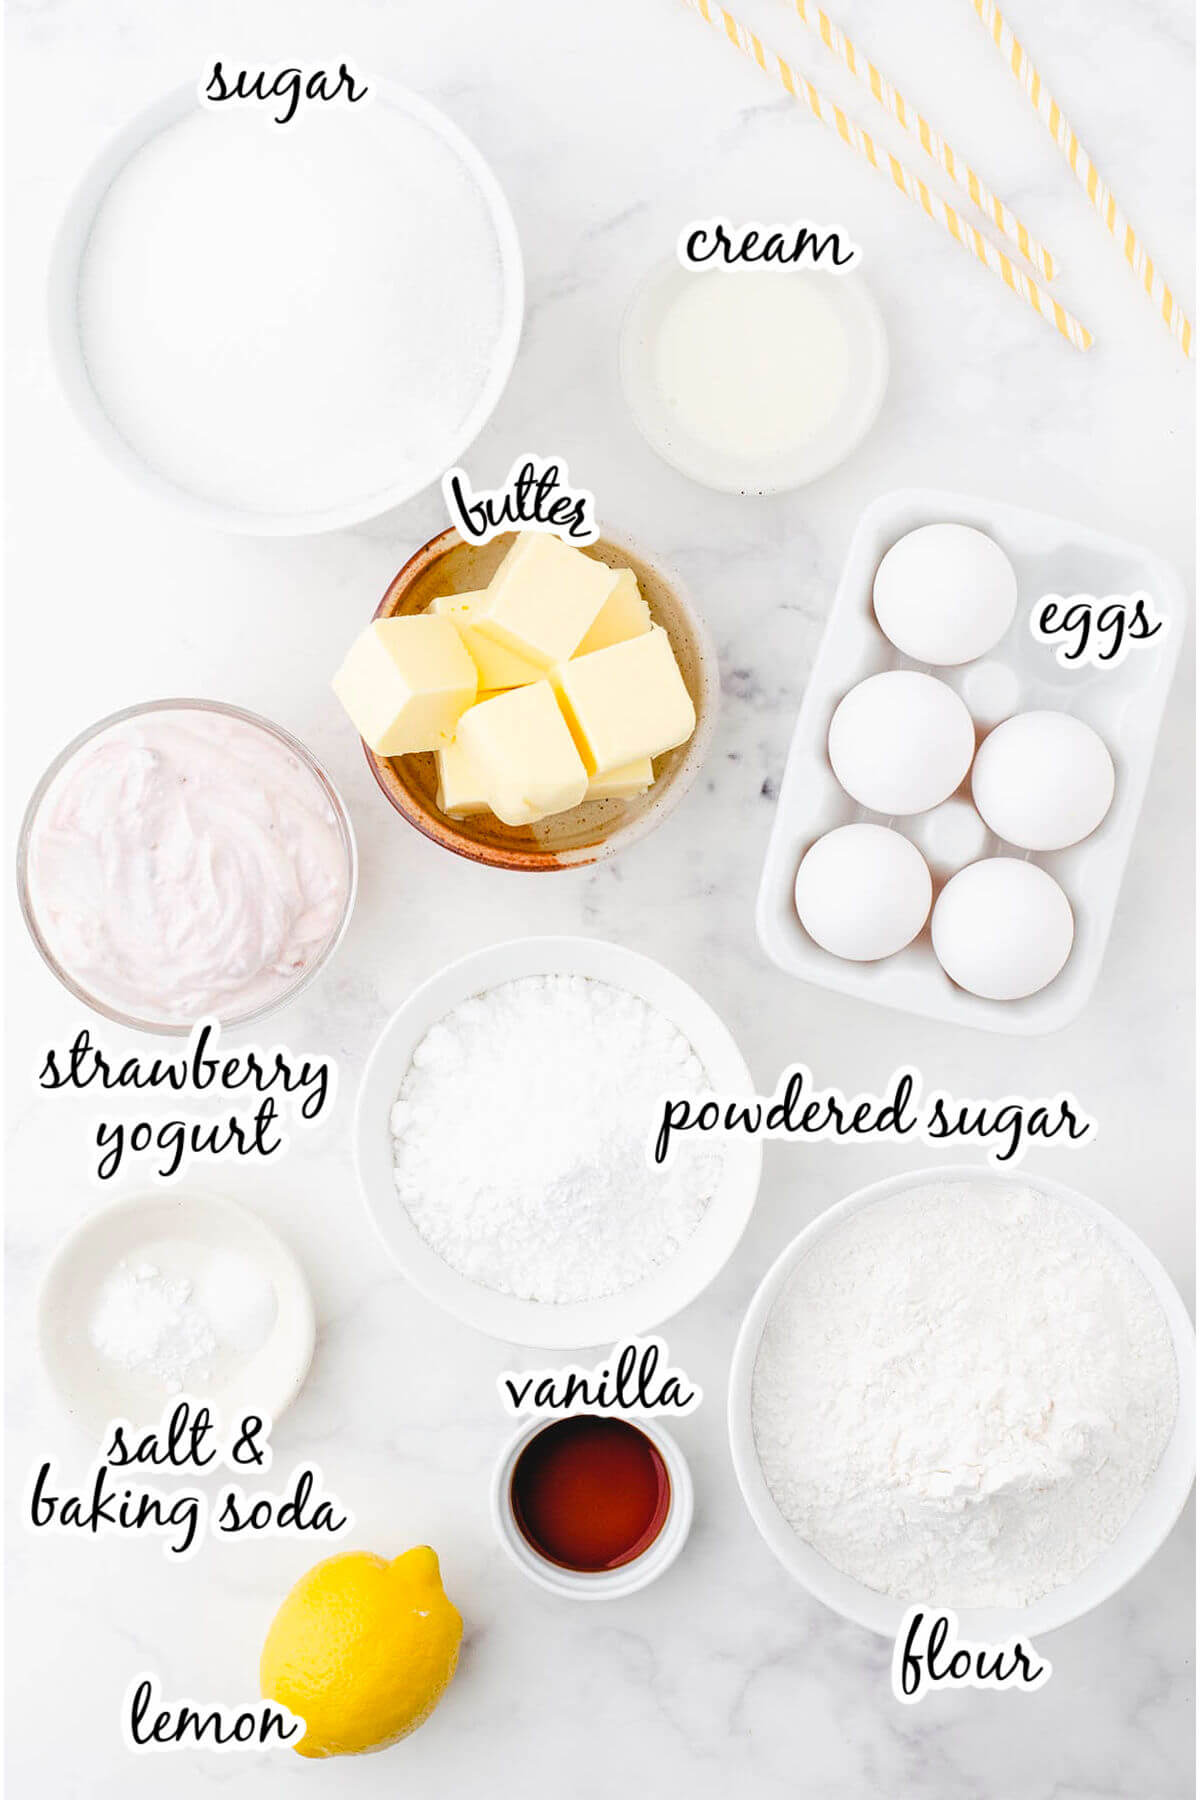 Ingredients need to make cupcake recipes, with print overlay.